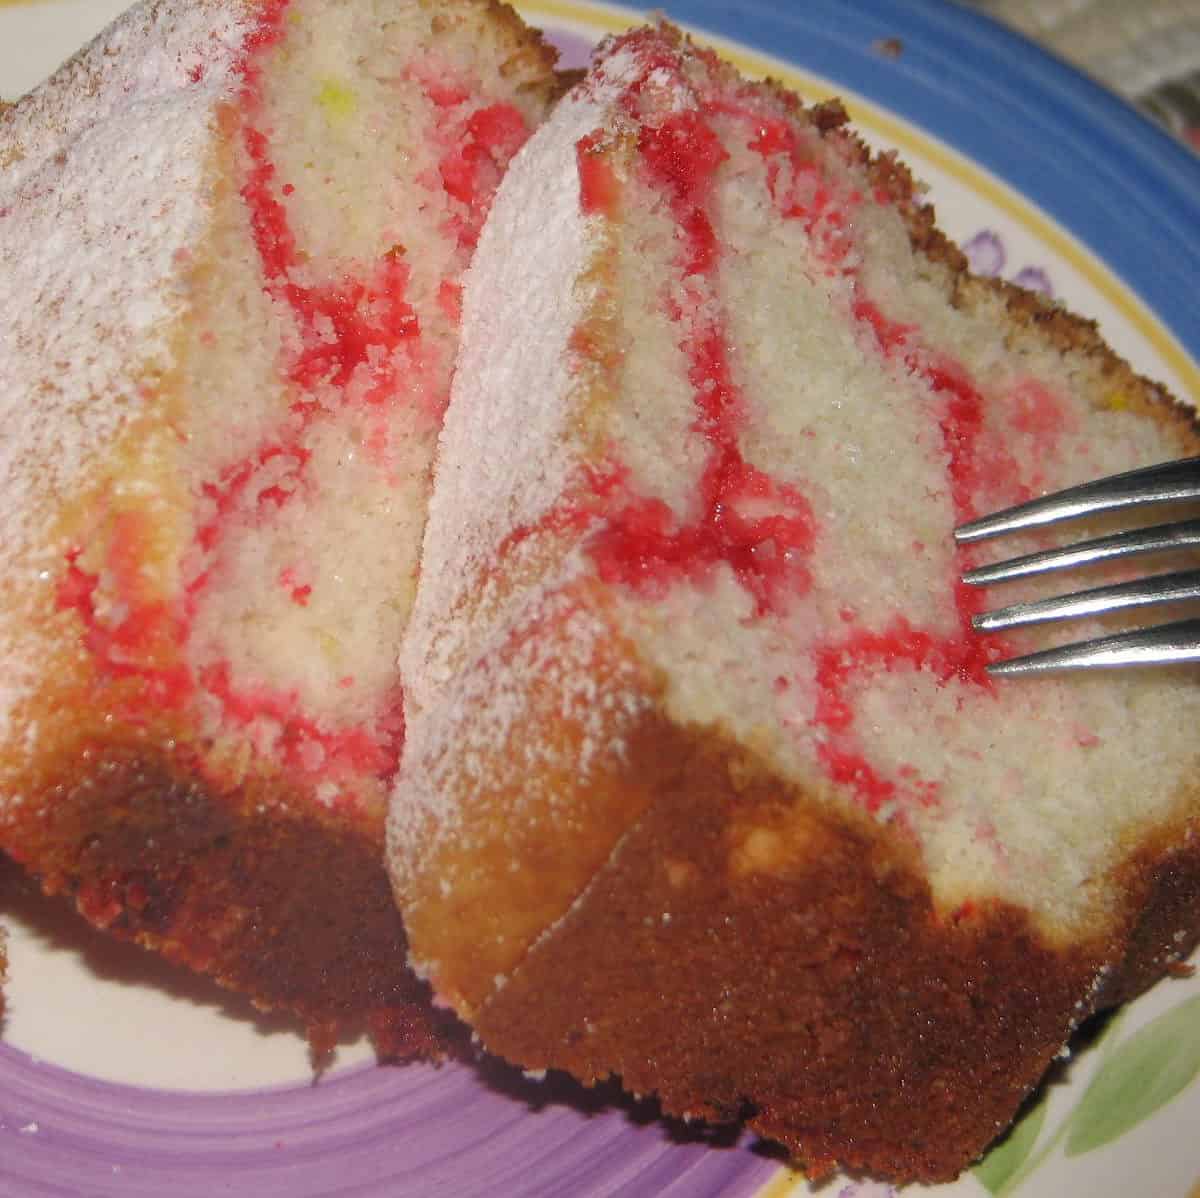 How to Impress Dinner Guests with Ruby Slipper Cake